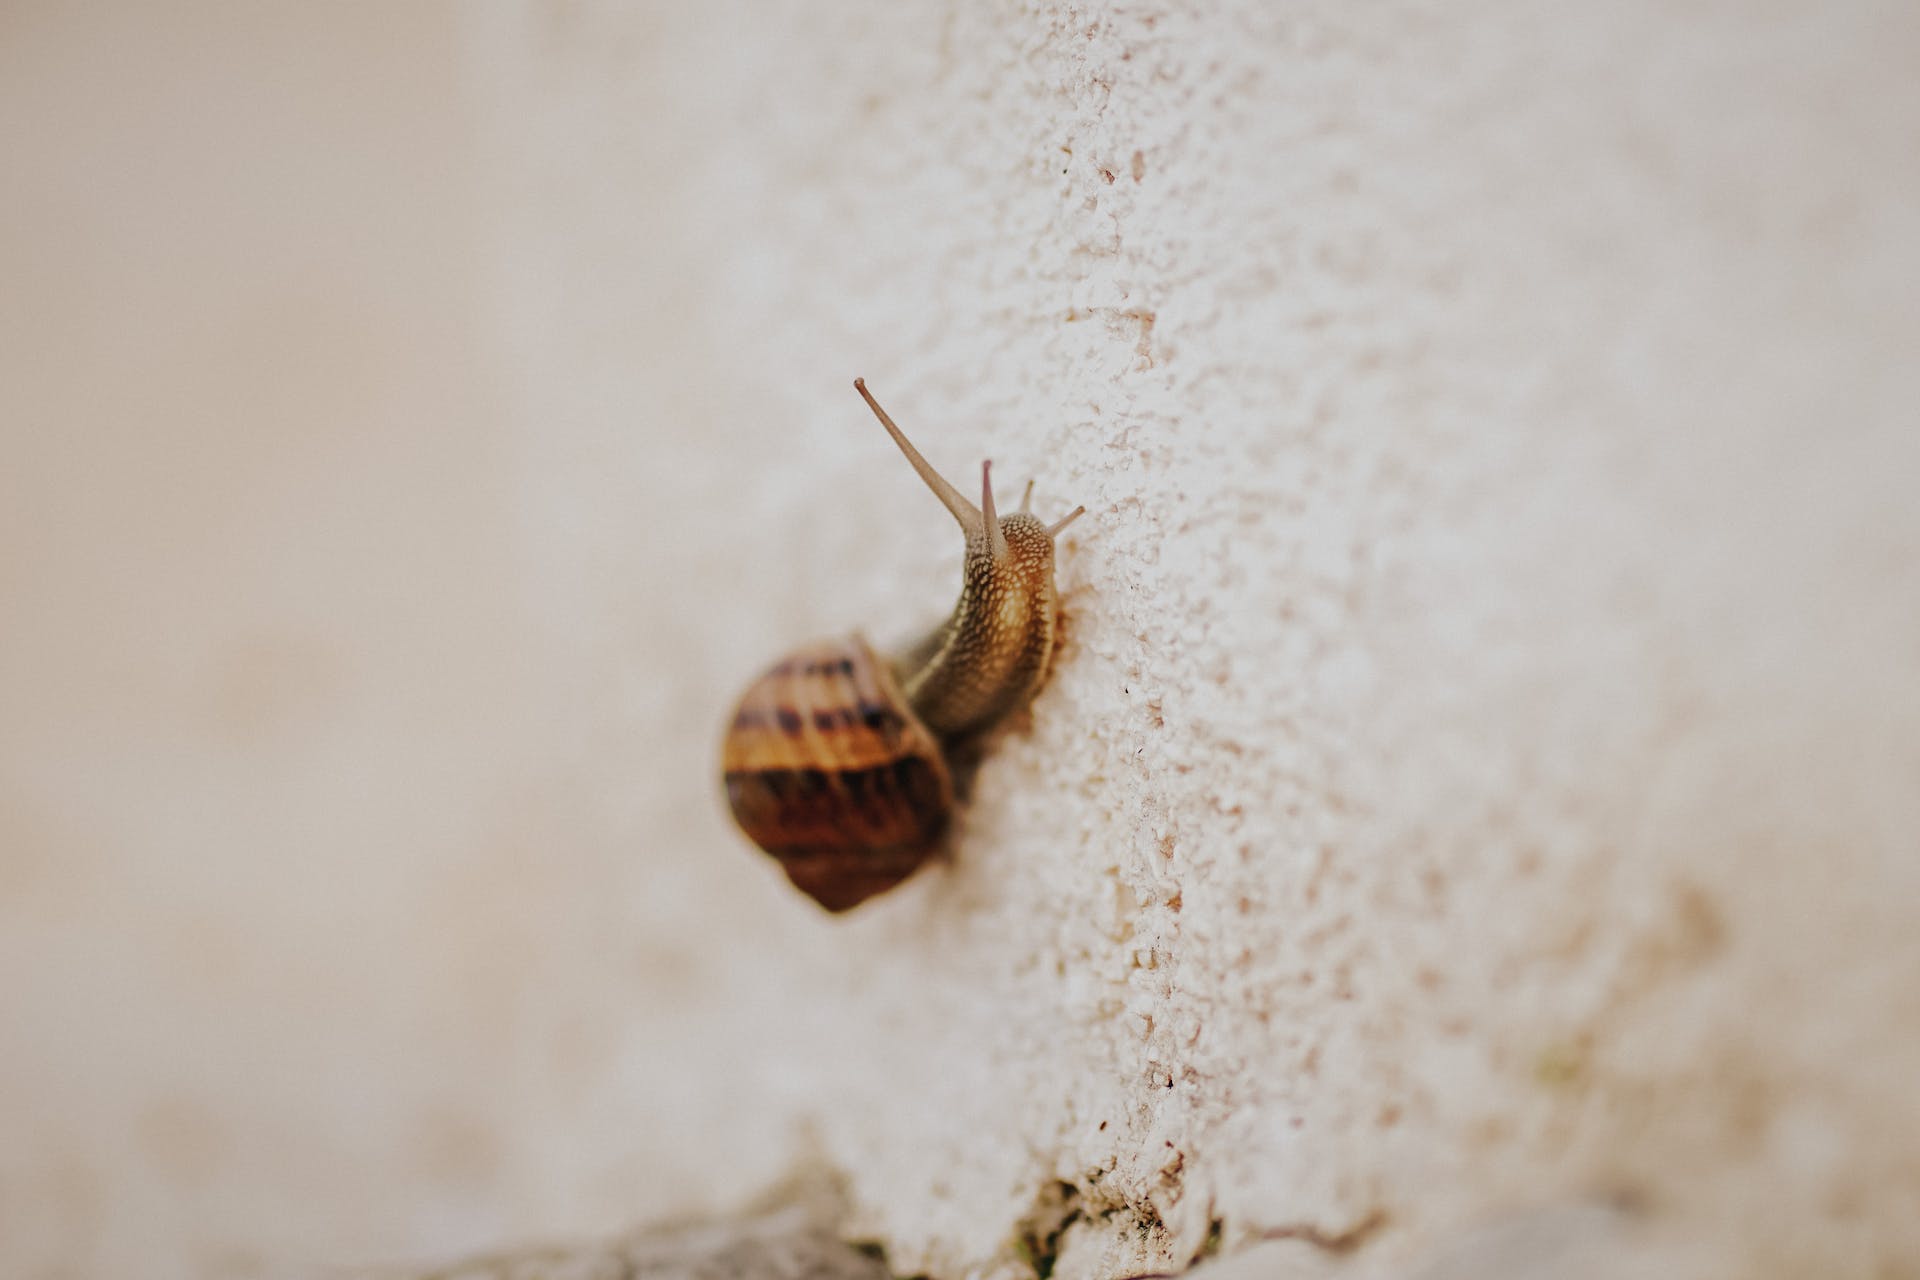 A snail on a wall | Source: Pexels